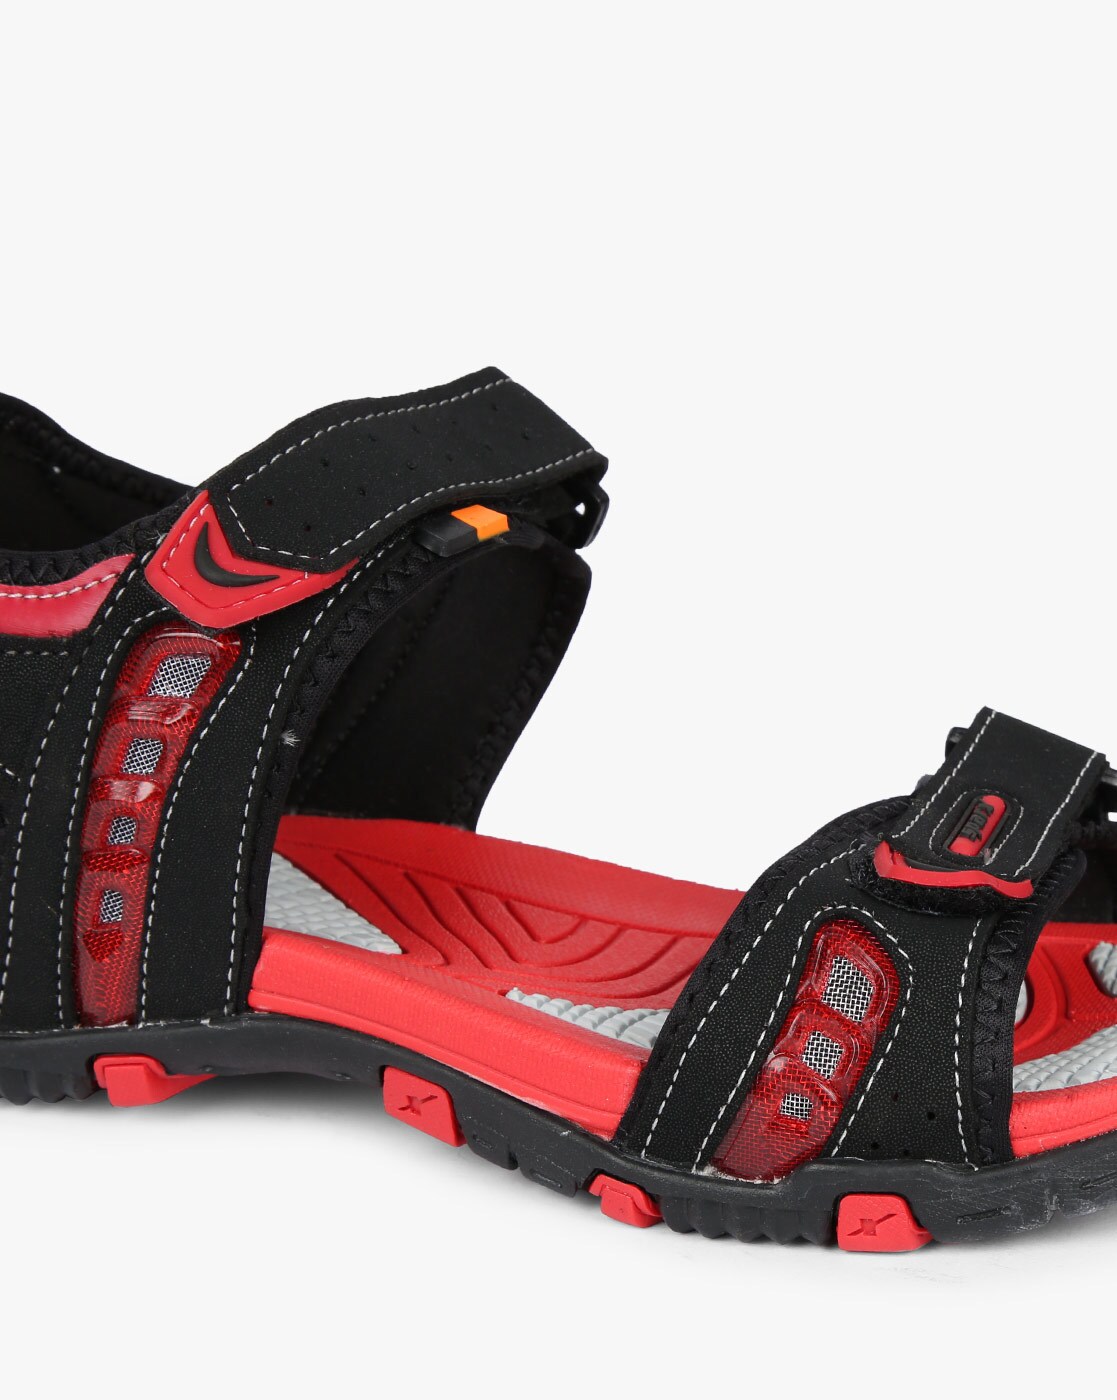 Buy Sparx sports sandals black and red at lowest price